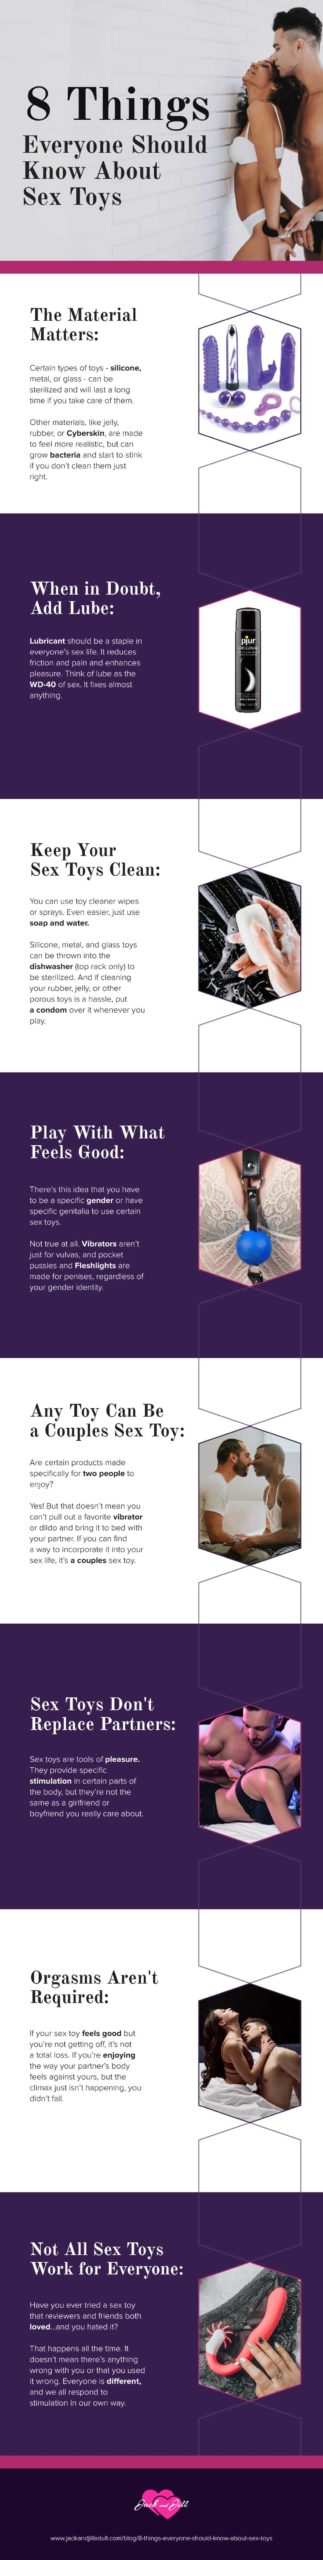 Infographic for 8 Things Everyone Should Know About Sex Toys